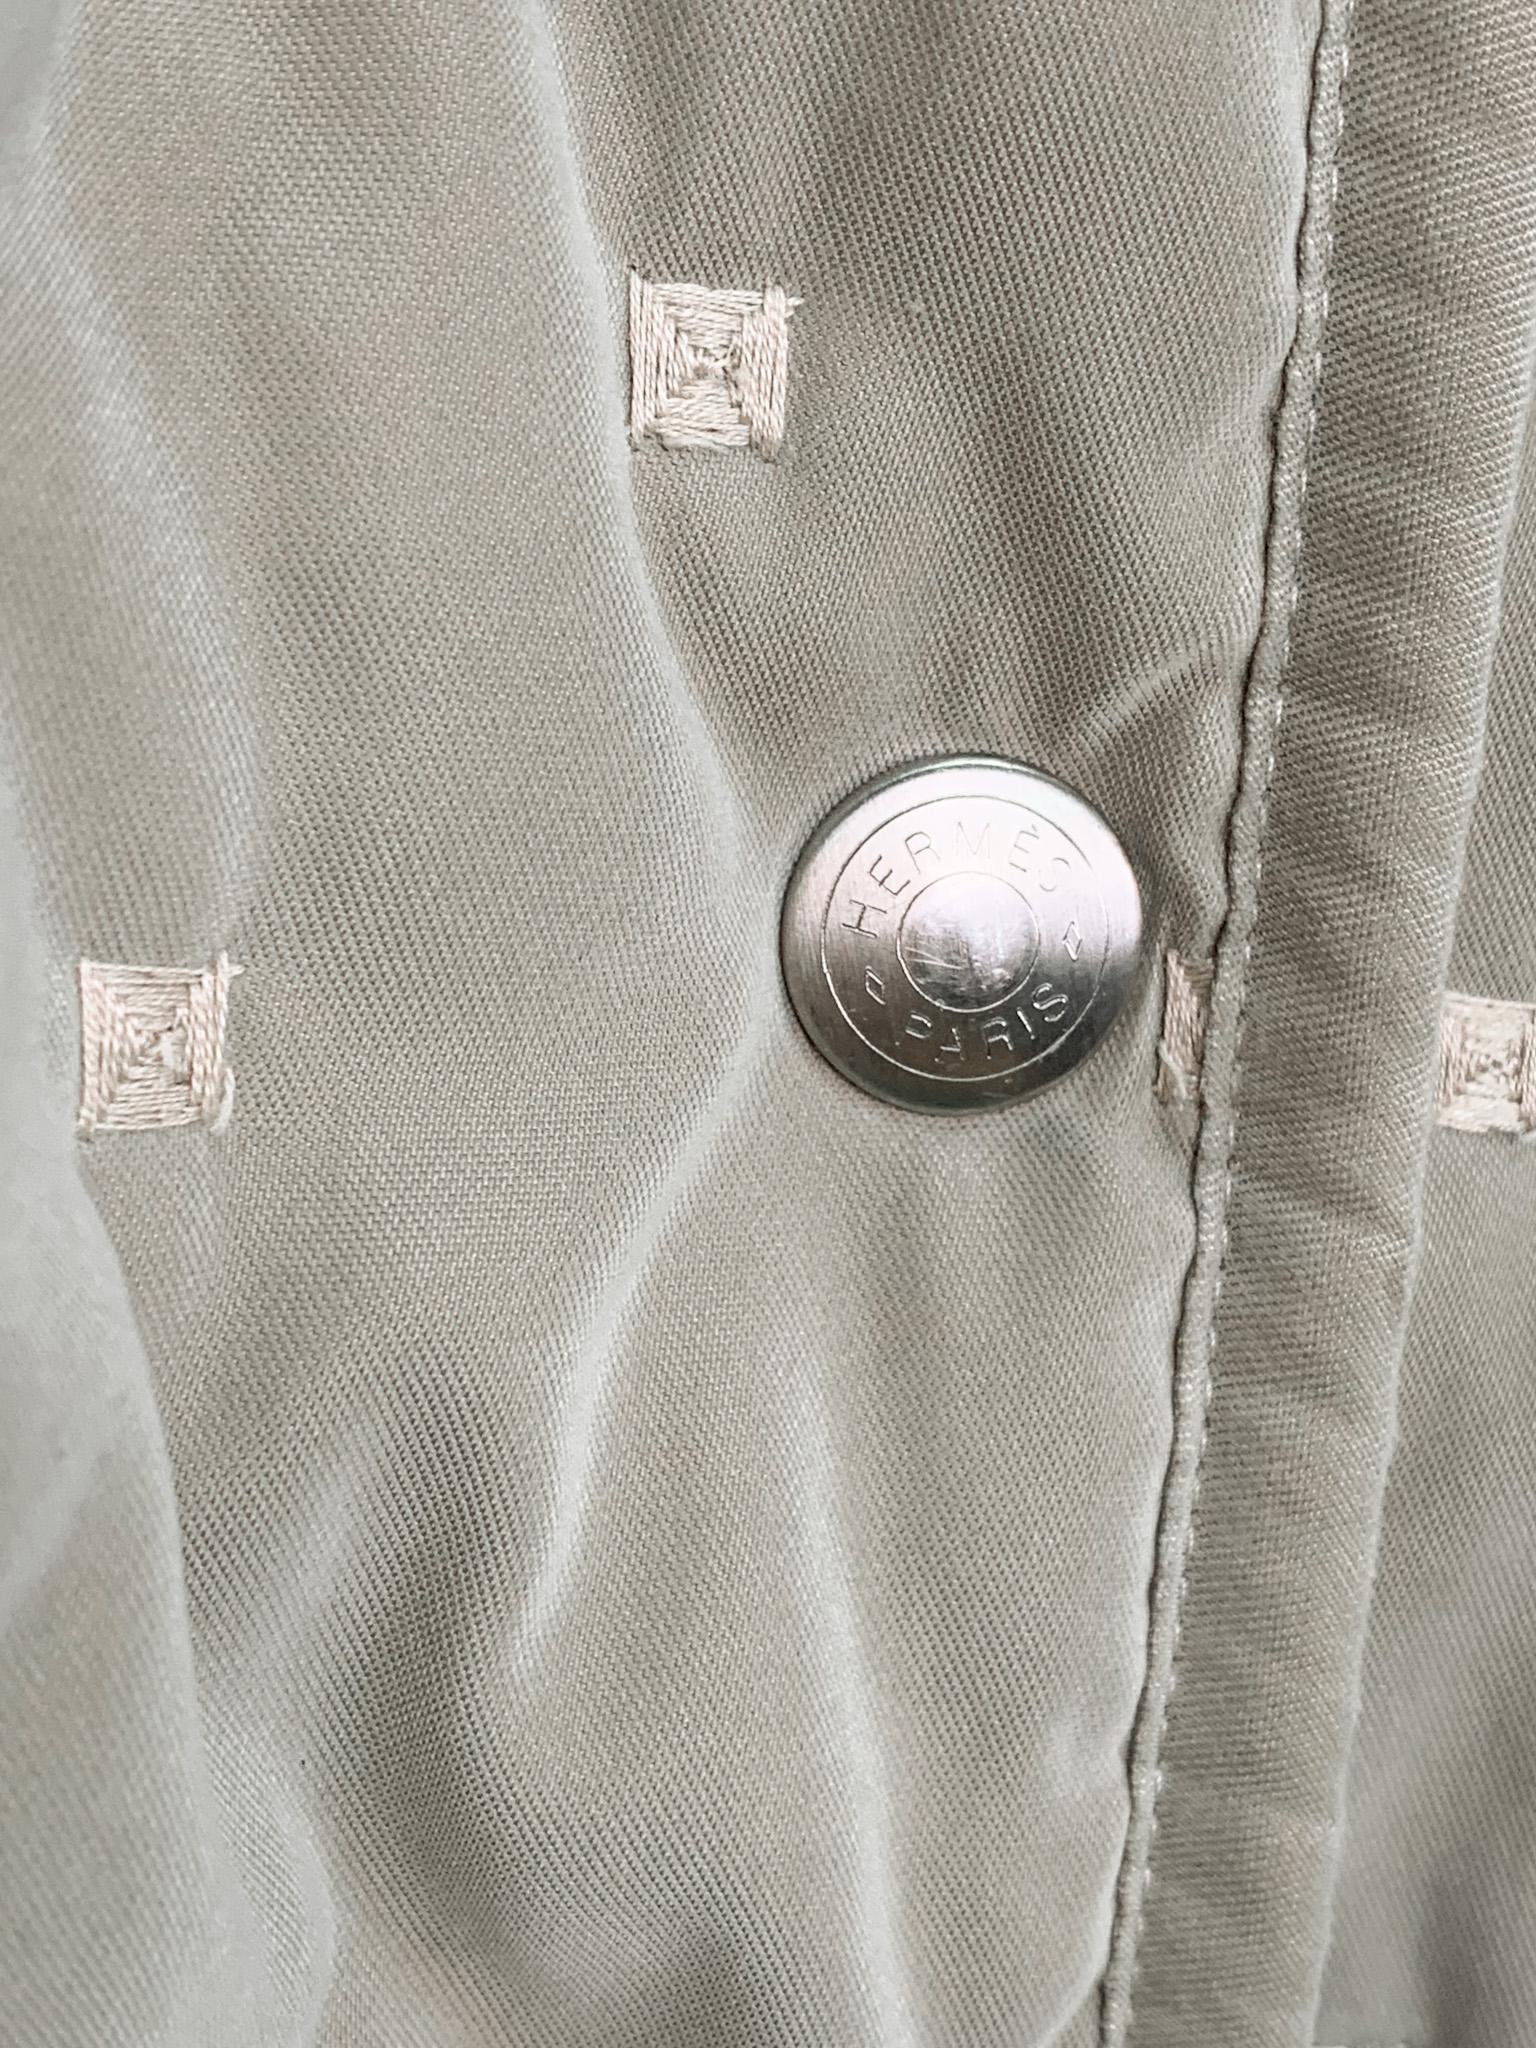 Hermes lightweight embroidered jacket/shacket with logo buttons. Made of a very high-end fabric resembling peach peel to the touch. The way this material reflects the light deserves a particular mention: its peachy, matte surface neither absorbs